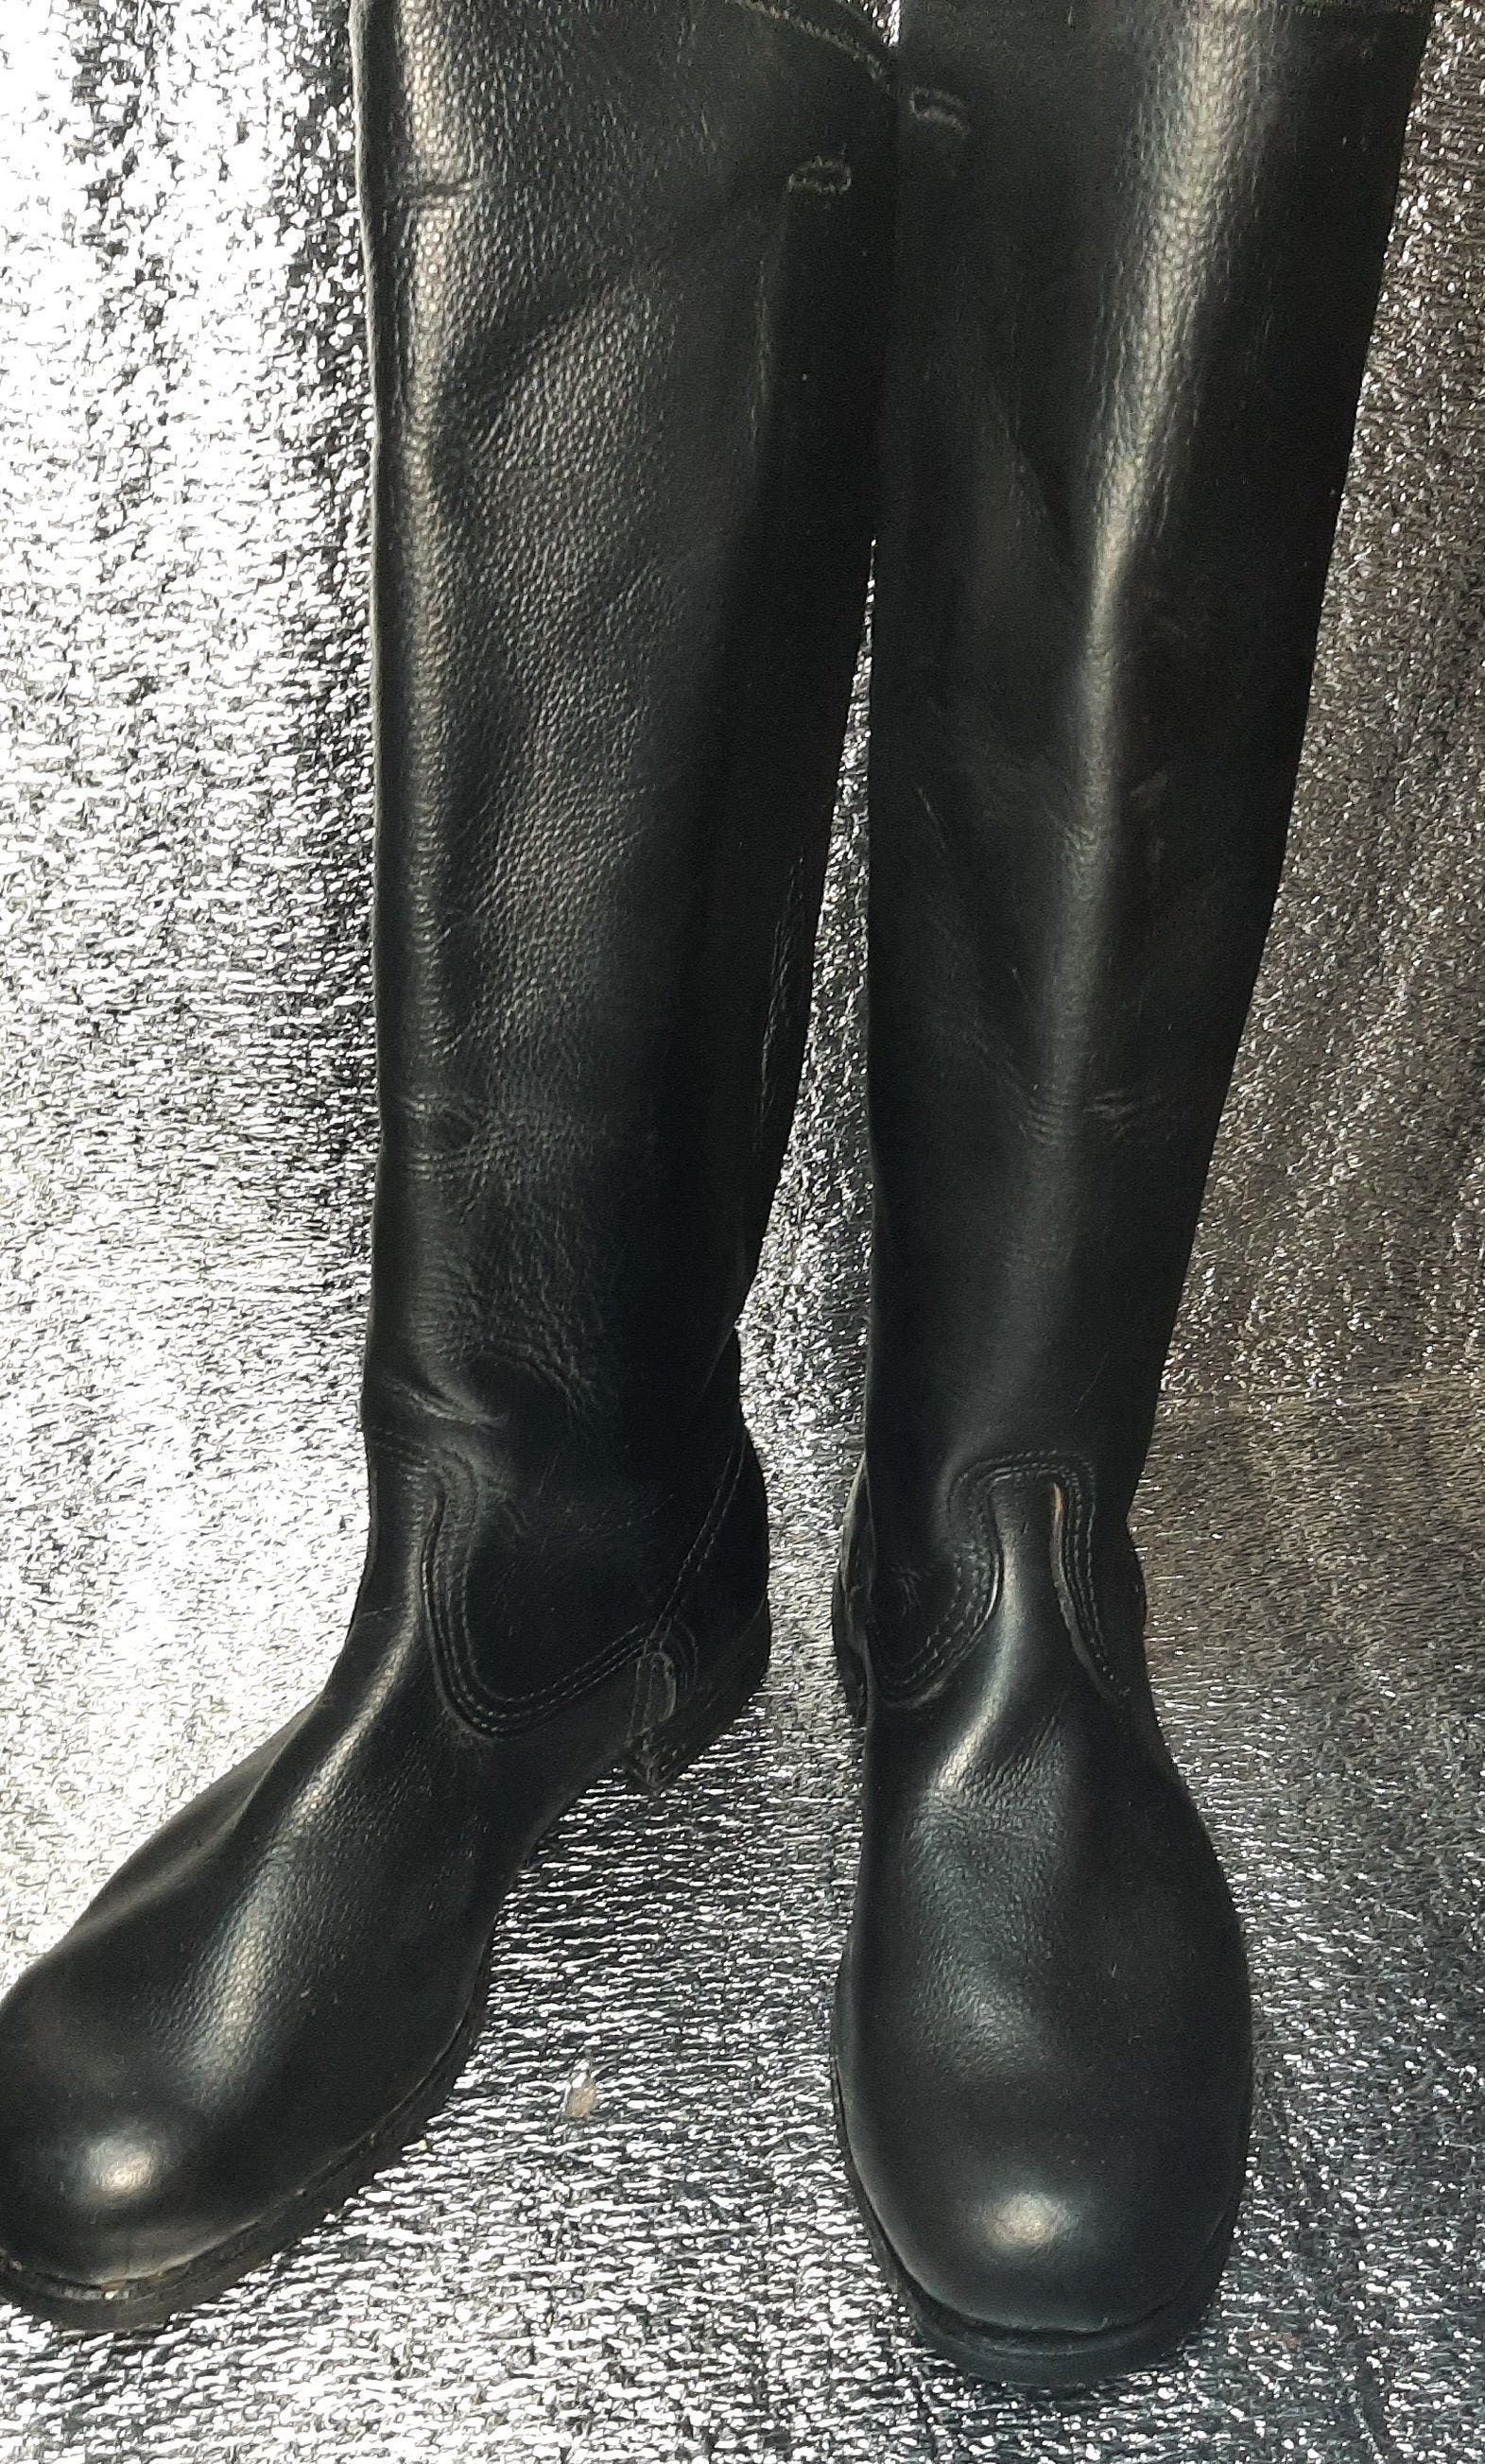 Soviet Military Leather Boots Officers USSR | Etsy